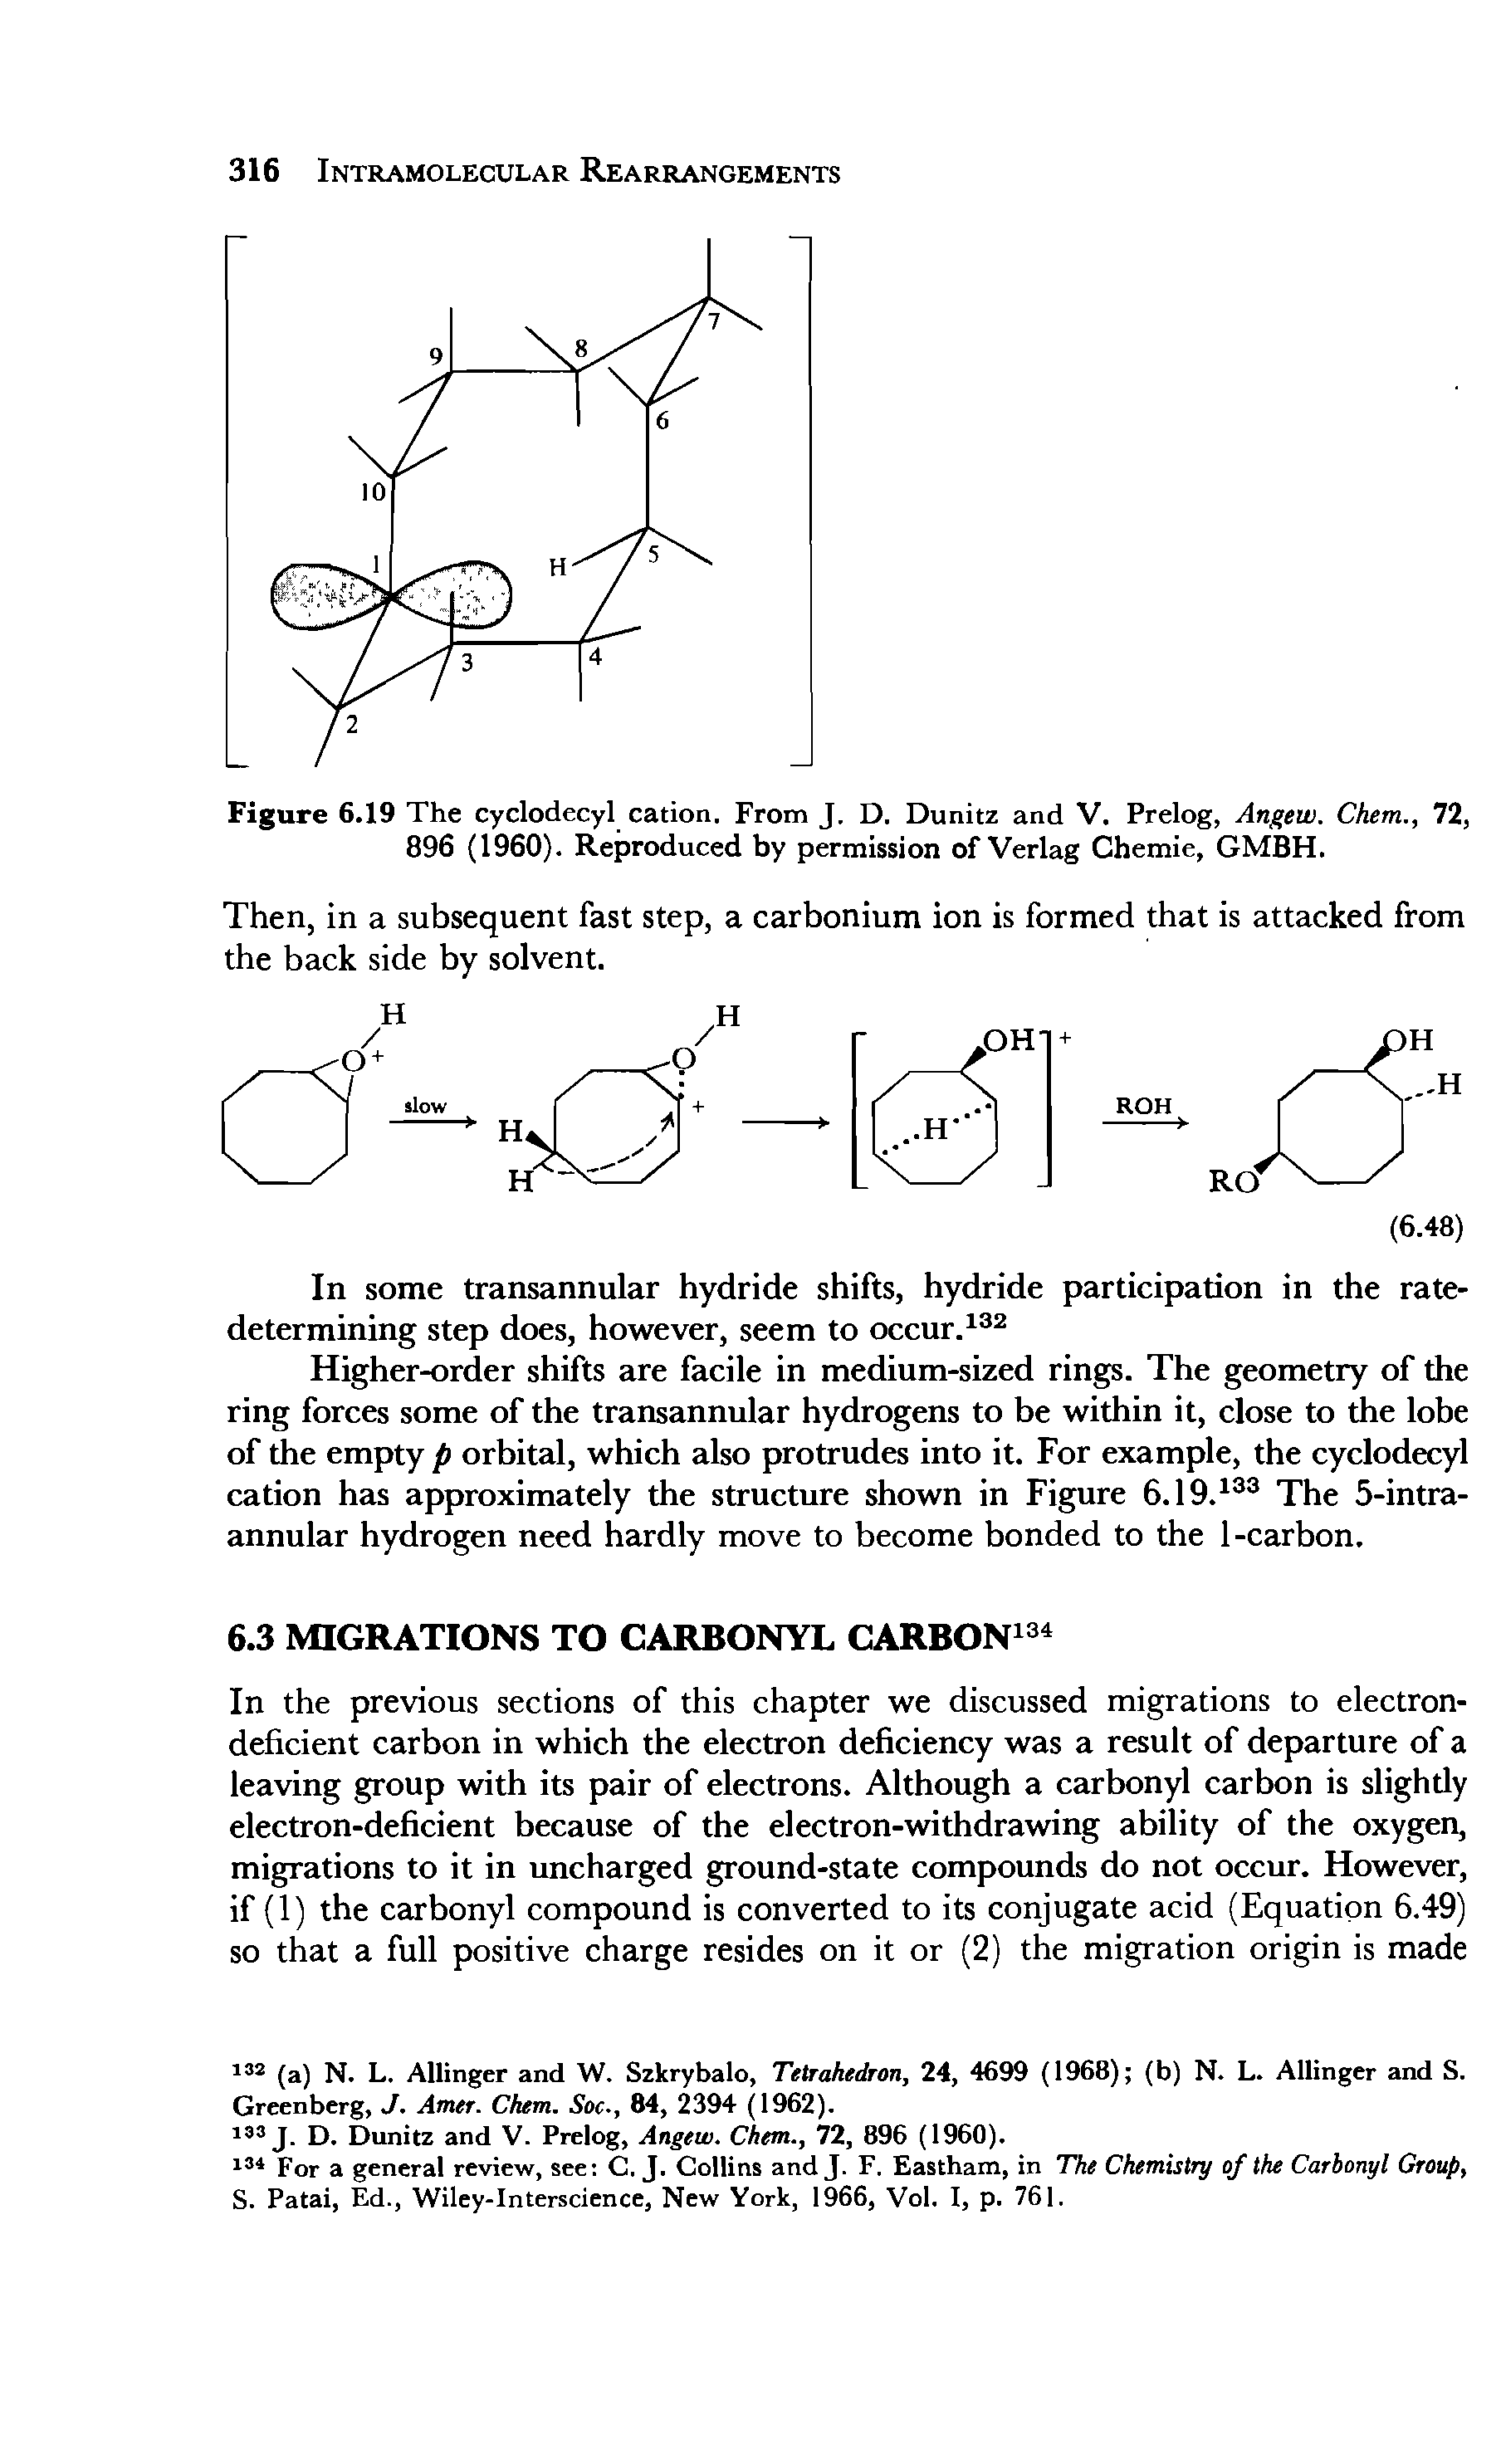 Figure 6.19 The cyclodecyl cation. From J. D. Dunitz and V. Prelog, Angew. Chem., 72, 896 (1960). Reproduced by permission of Verlag Chemie, GMBH.